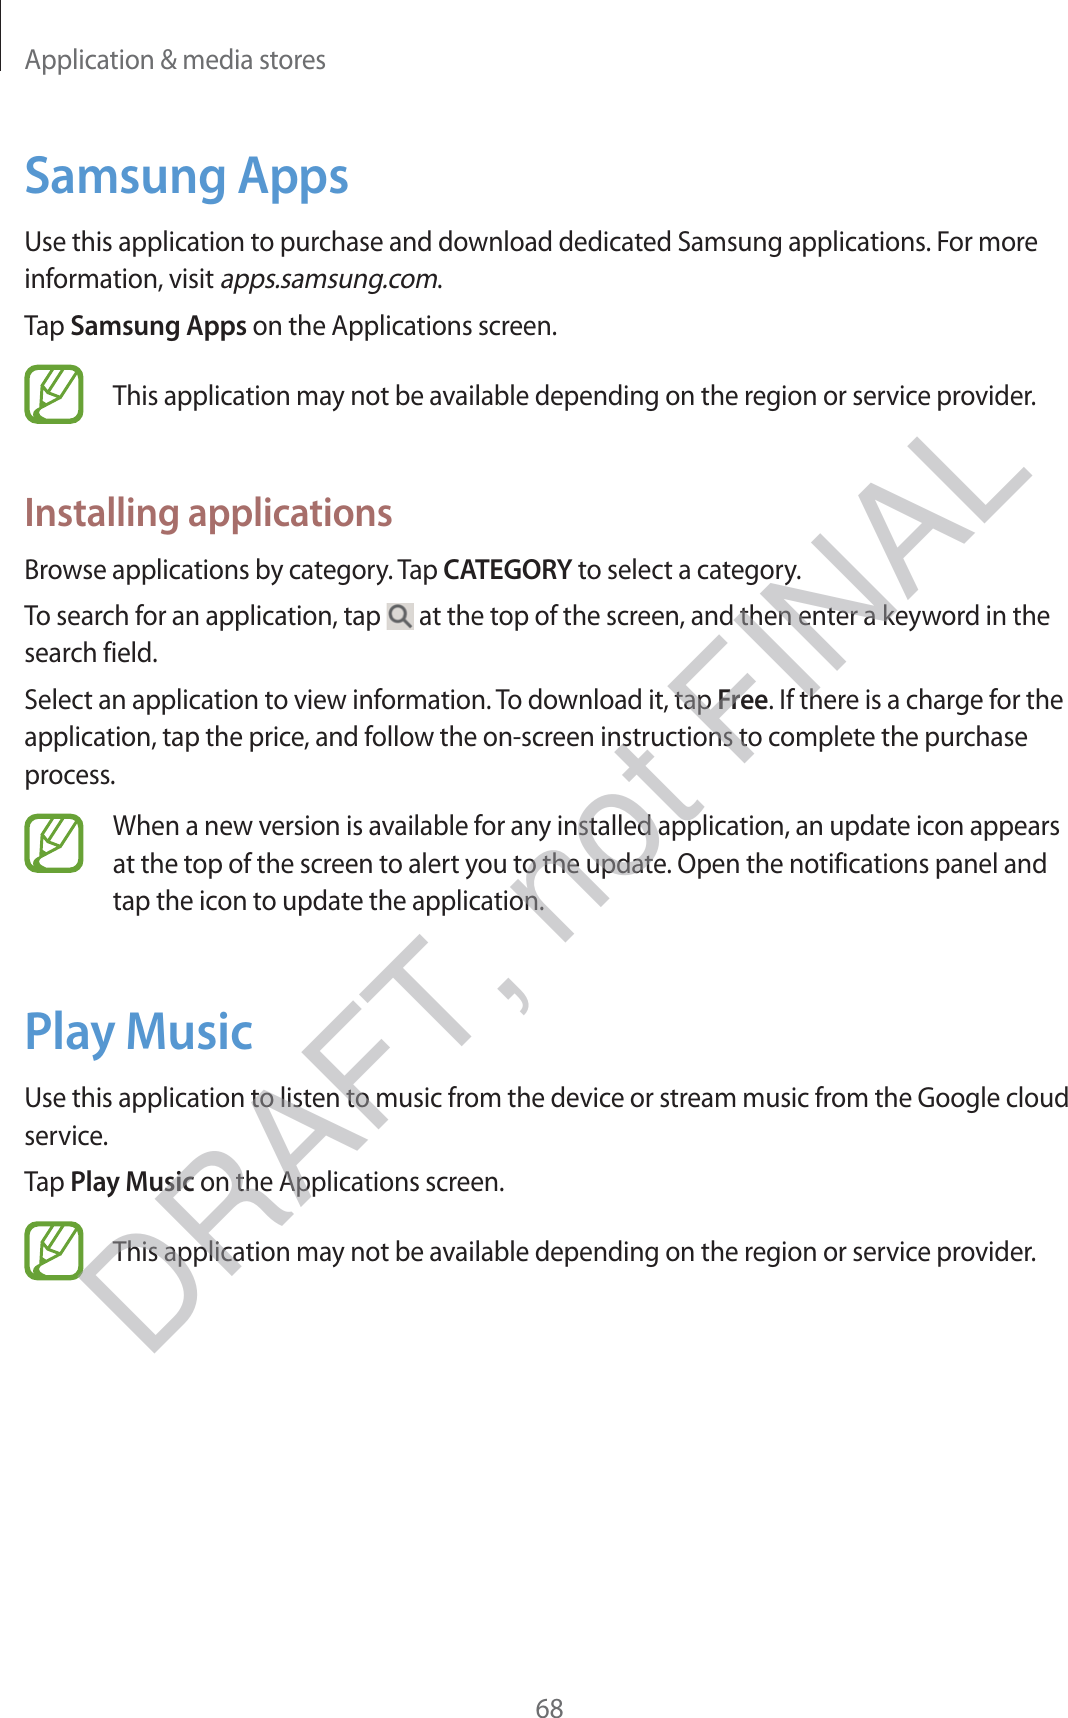 Application &amp; media stores68Samsung AppsUse this application to purchase and download dedicated Samsung applications. For more information, visit apps.samsung.com.Tap Samsung Apps on the Applications screen.This application may not be available depending on the region or service provider.Installing applicationsBrowse applications by category. Tap CATEGORY to select a category.To search for an application, tap   at the top of the screen, and then enter a keyword in the search field.Select an application to view information. To download it, tap Free. If there is a charge for the application, tap the price, and follow the on-screen instructions to complete the purchase process.When a new version is available for any installed application, an update icon appears at the top of the screen to alert you to the update. Open the notifications panel and tap the icon to update the application.Play MusicUse this application to listen to music from the device or stream music from the Google cloud service.Tap Play Music on the Applications screen.This application may not be available depending on the region or service provider.DRAFT, not FINAL